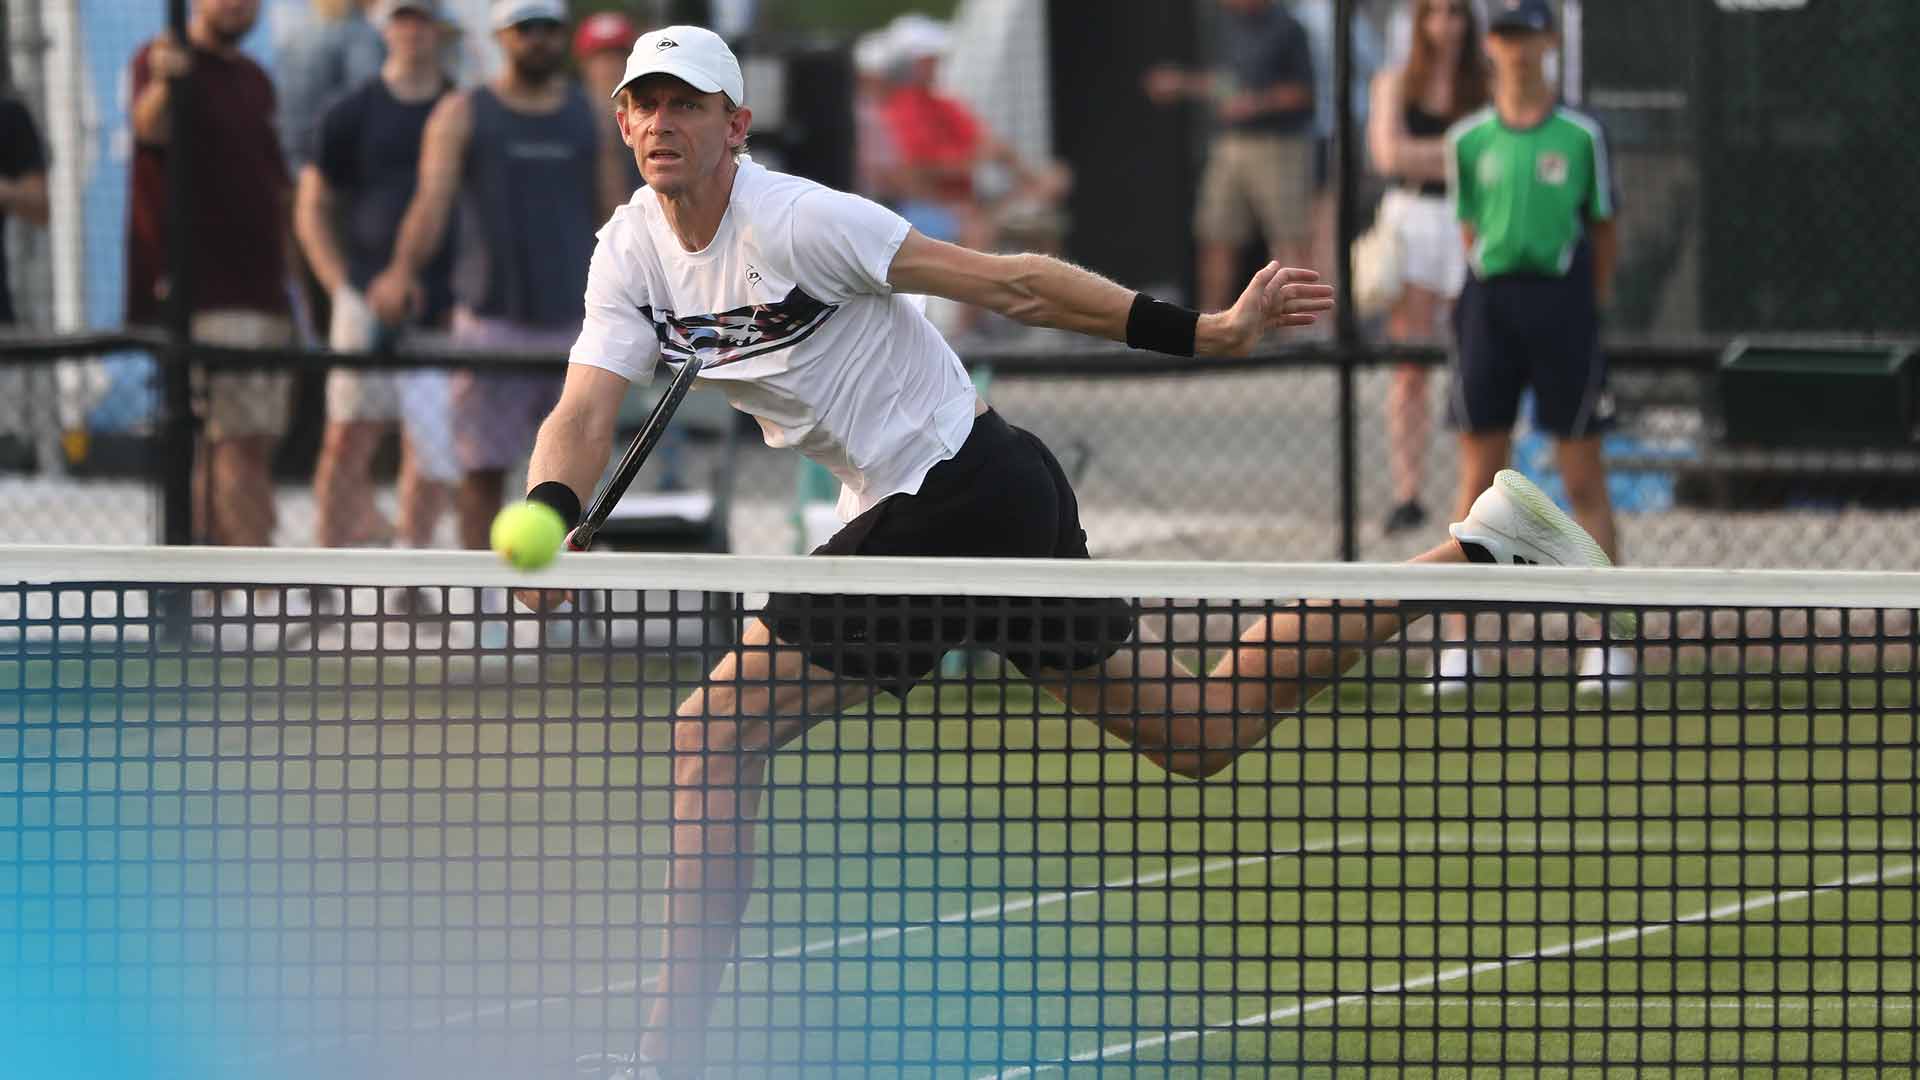 Kevin Anderson plays doubles alongside Ethan Quinn on Monday in Newport, the first tournament of his return from retirement.